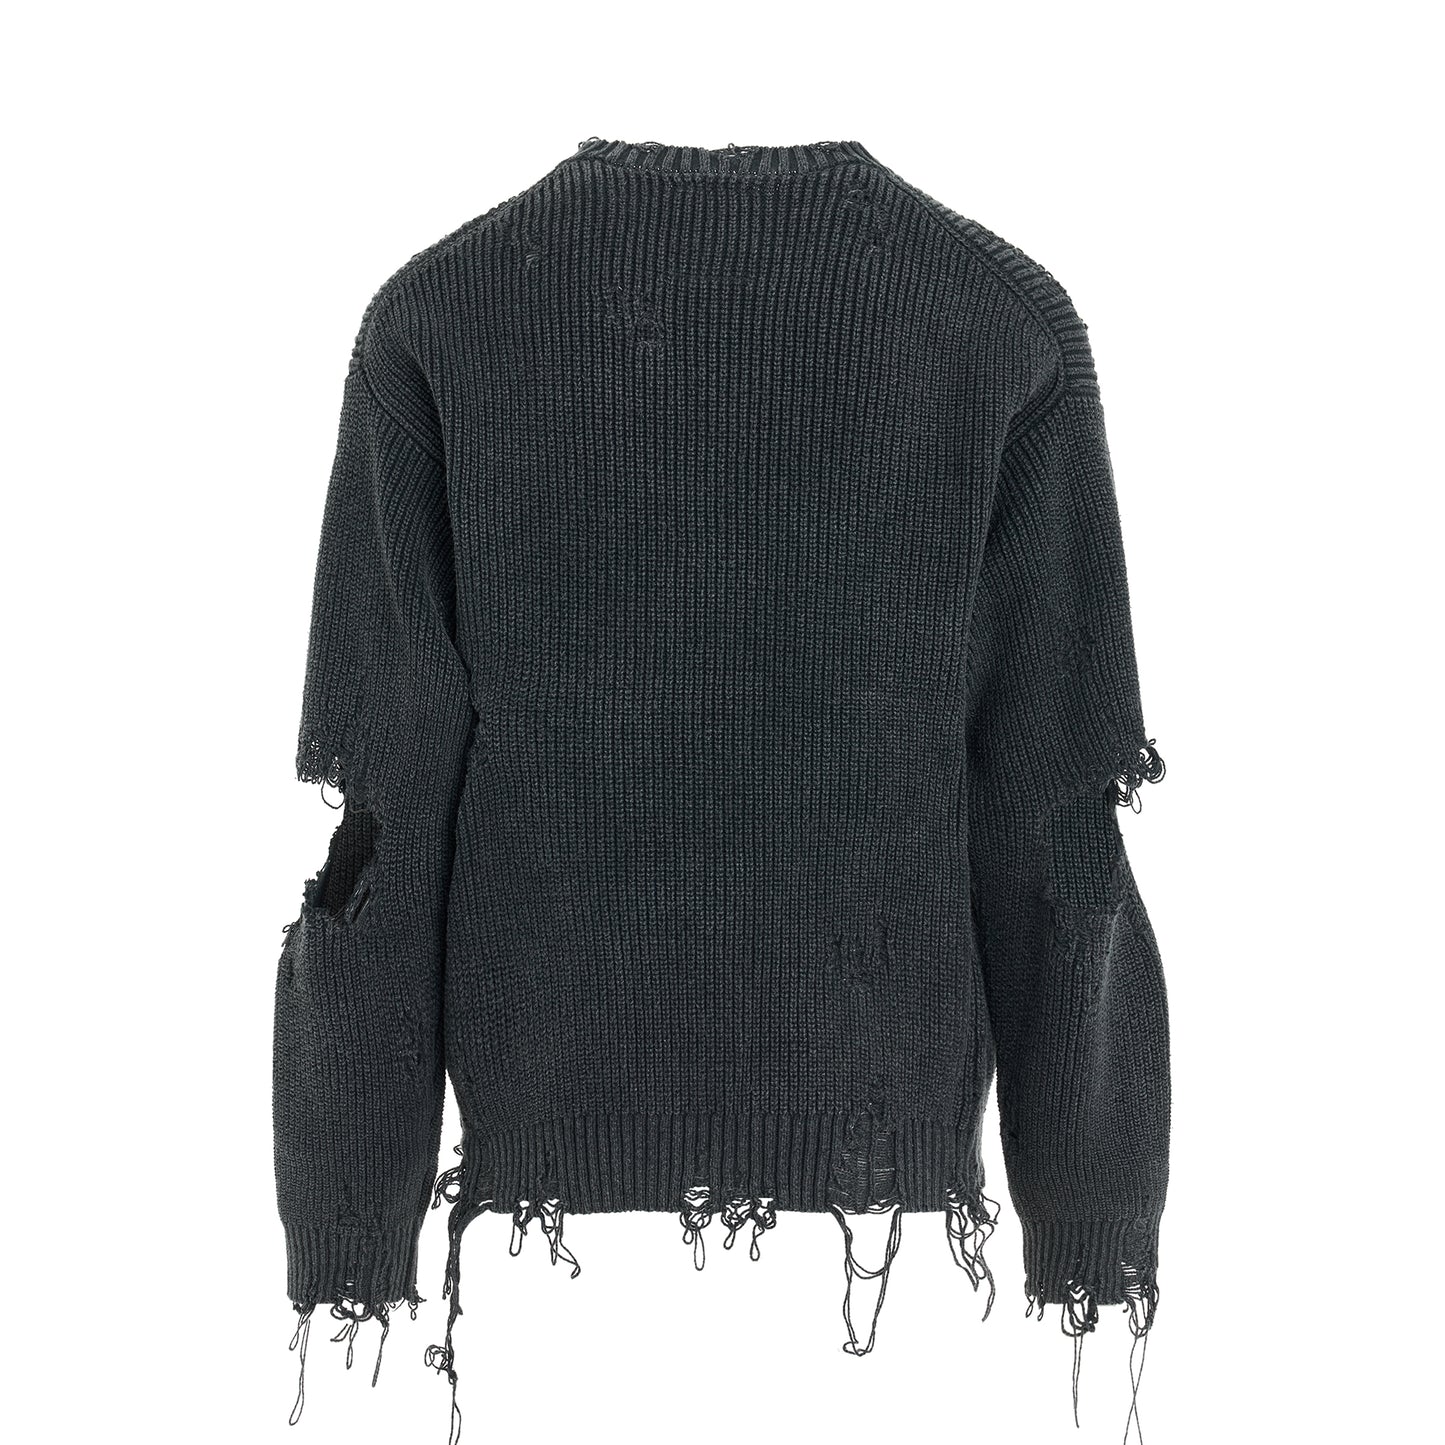 Bleached Knit Sweater in Black